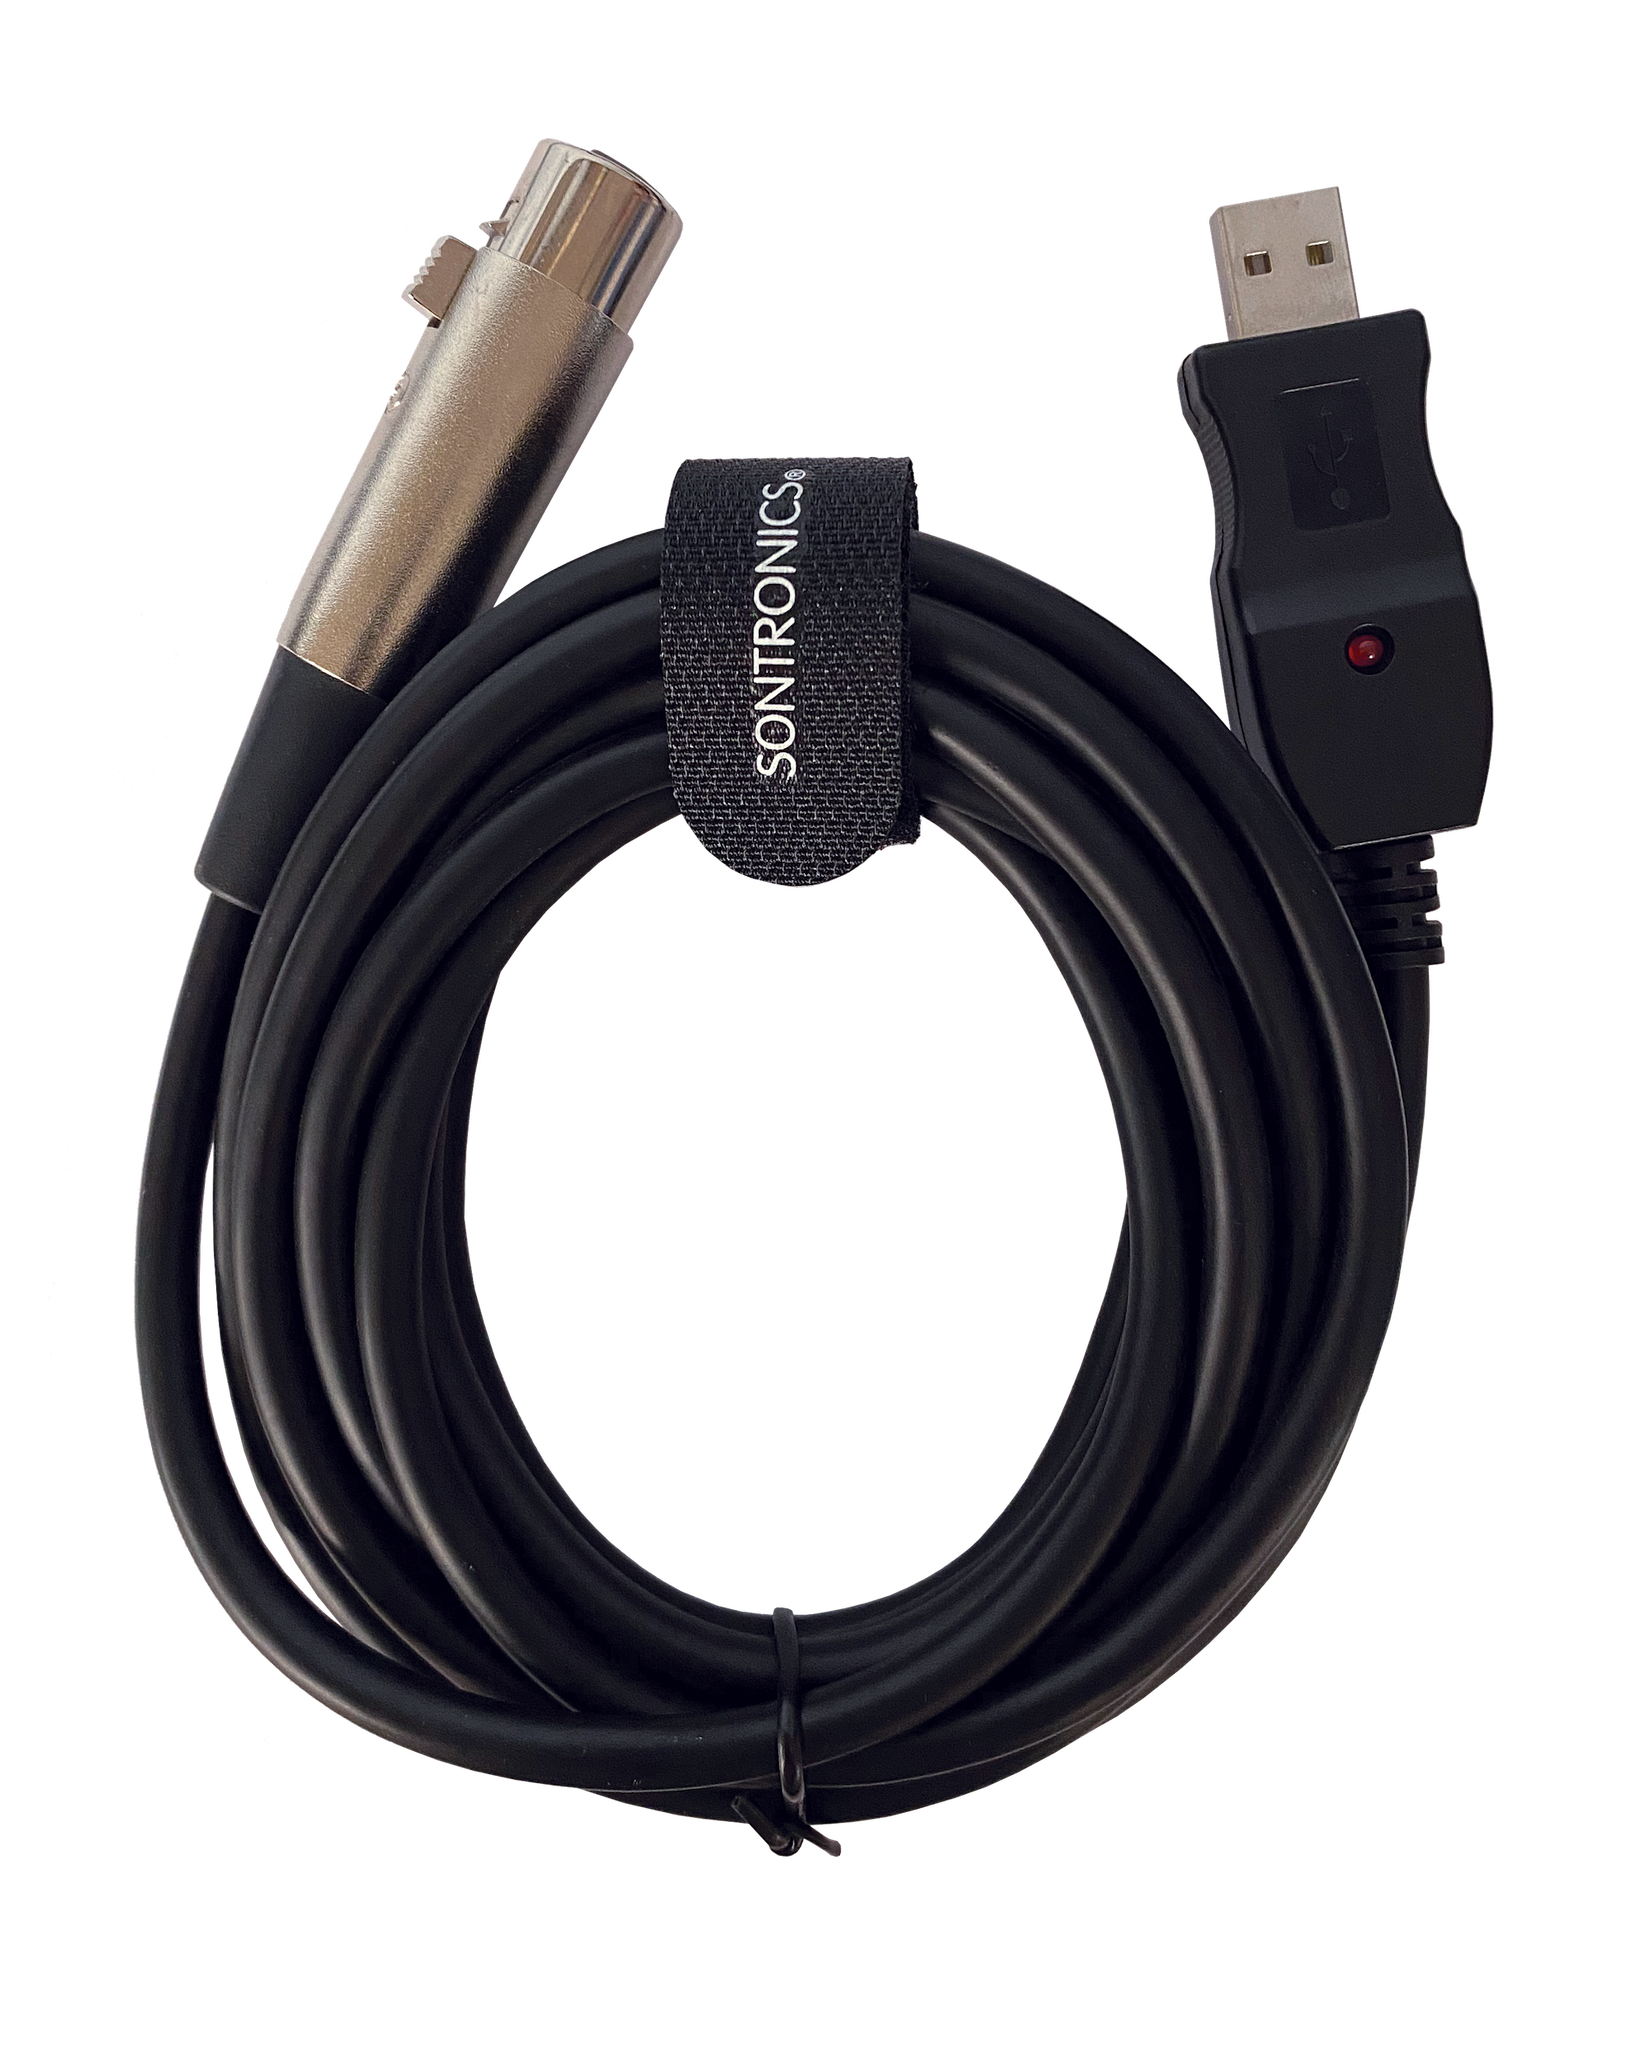 XLR-USB microphone cable